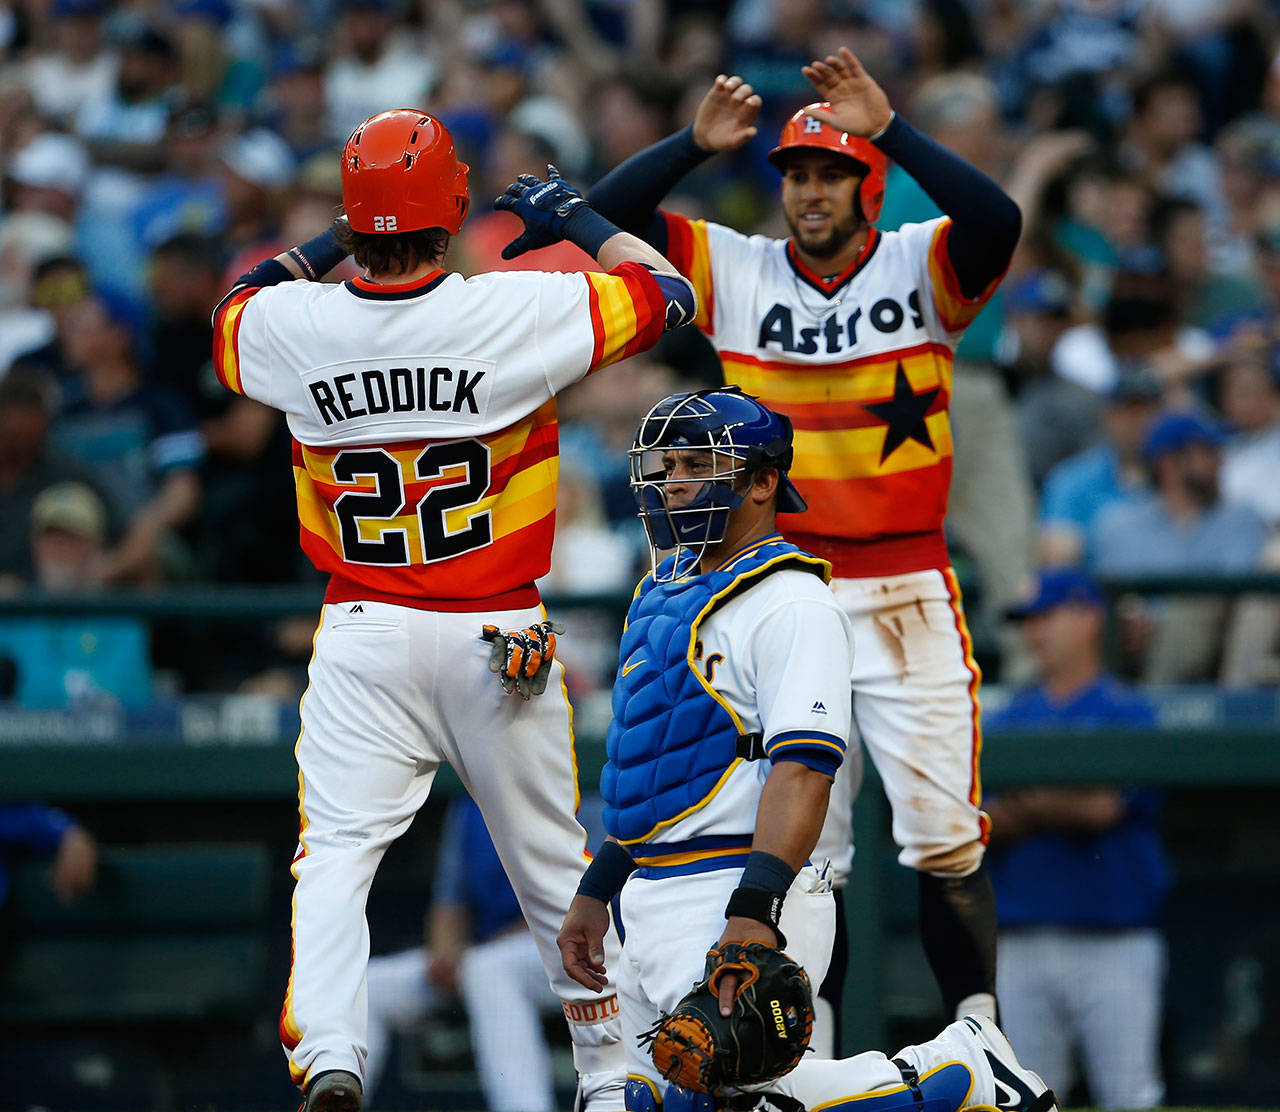 The Astros George Springer (right) celebrates with Josh Reddick (22) at home after Reddick’s home run as Mariners catcher Carlos Ruiz looks on during the third inning of a game June 24, 2017, in Seattle. (AP Photo/Jason Redmond)